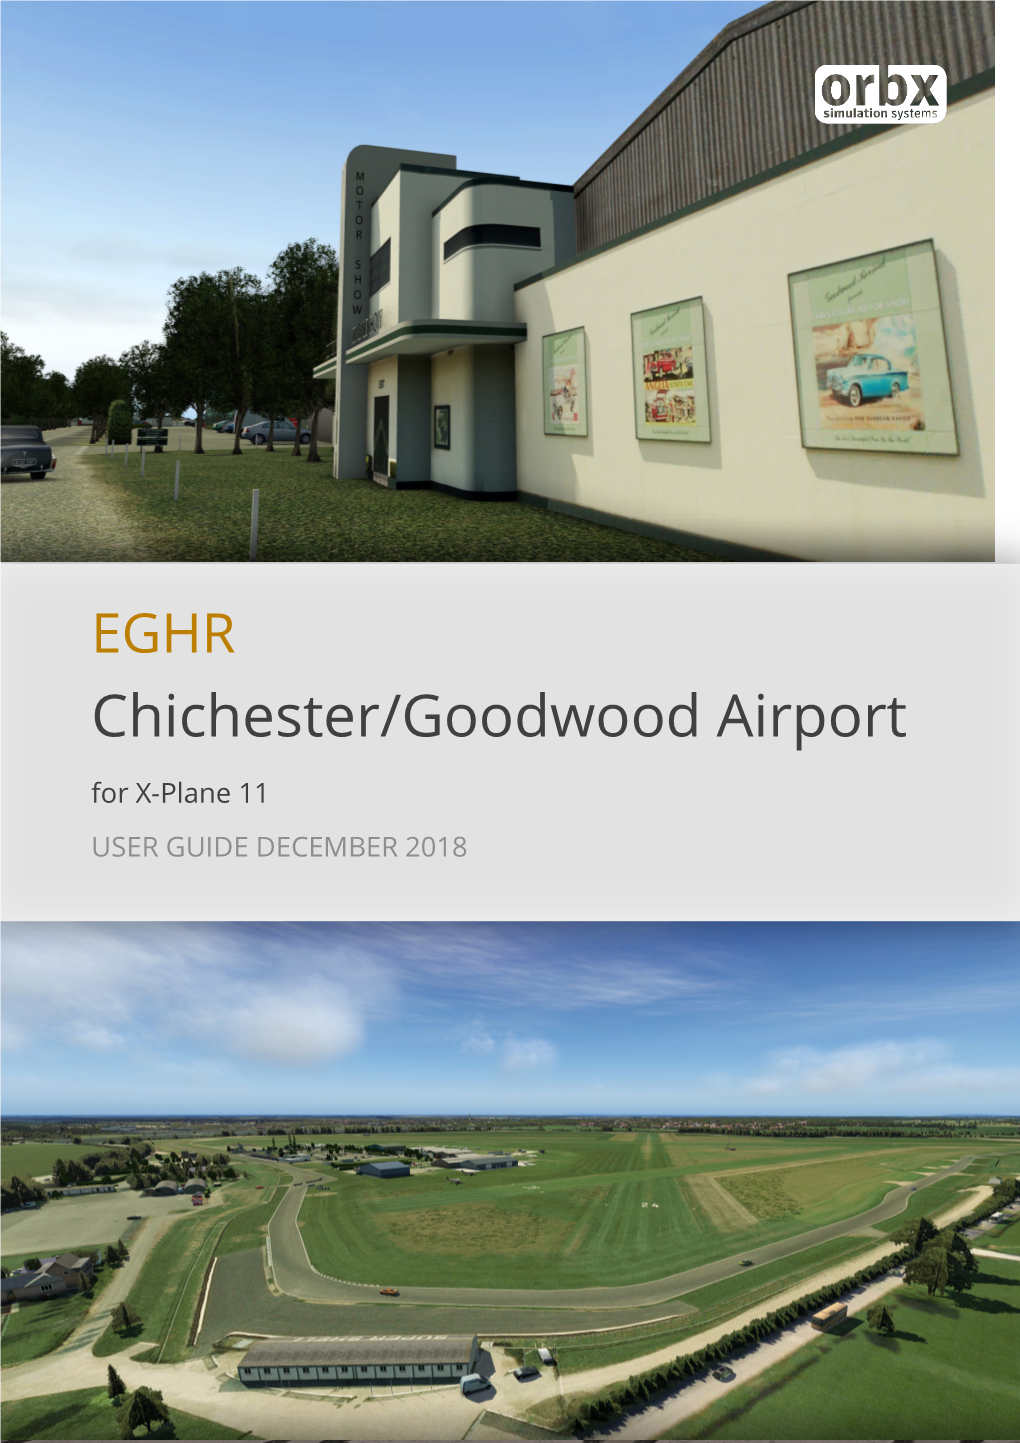 Chichester/Goodwood Airport for X-Plane 11 USER GUIDE DECEMBER 2018